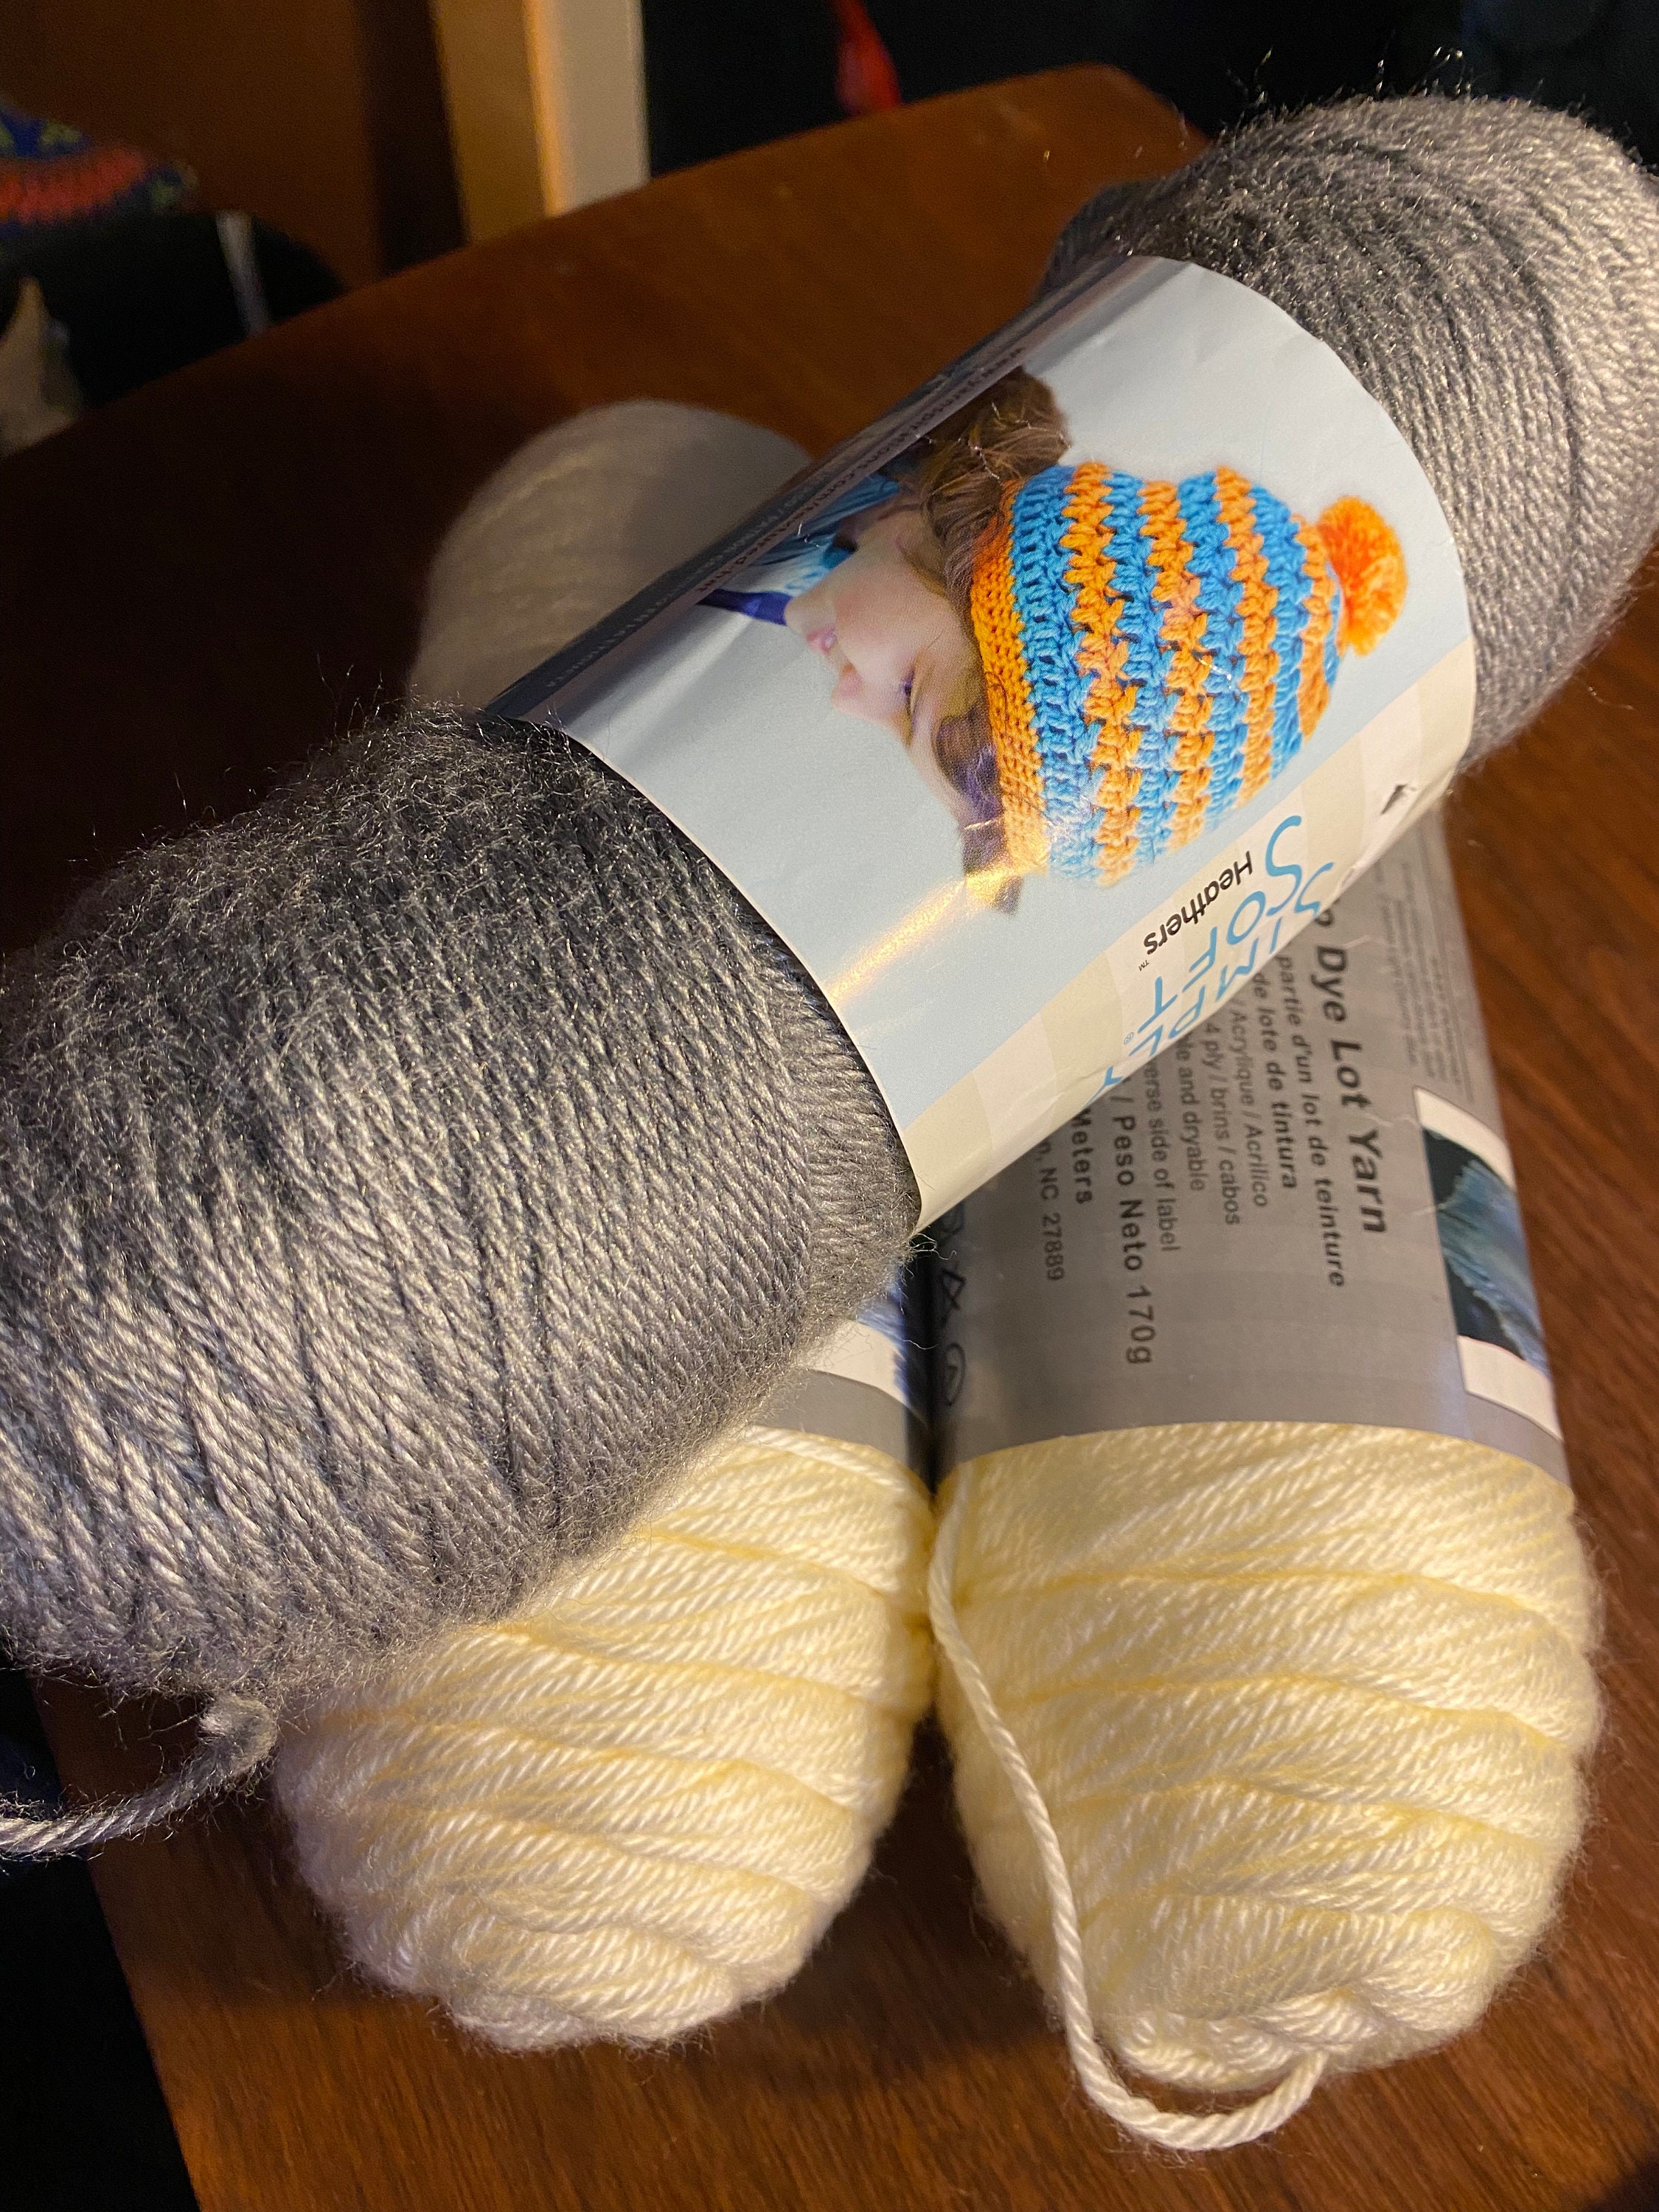 Found these Caron Cakes for a great price; there were only 4 in the same  dye lot. 603 yards/300g per cake, worsted weight. How big of a blanket  could I knit with